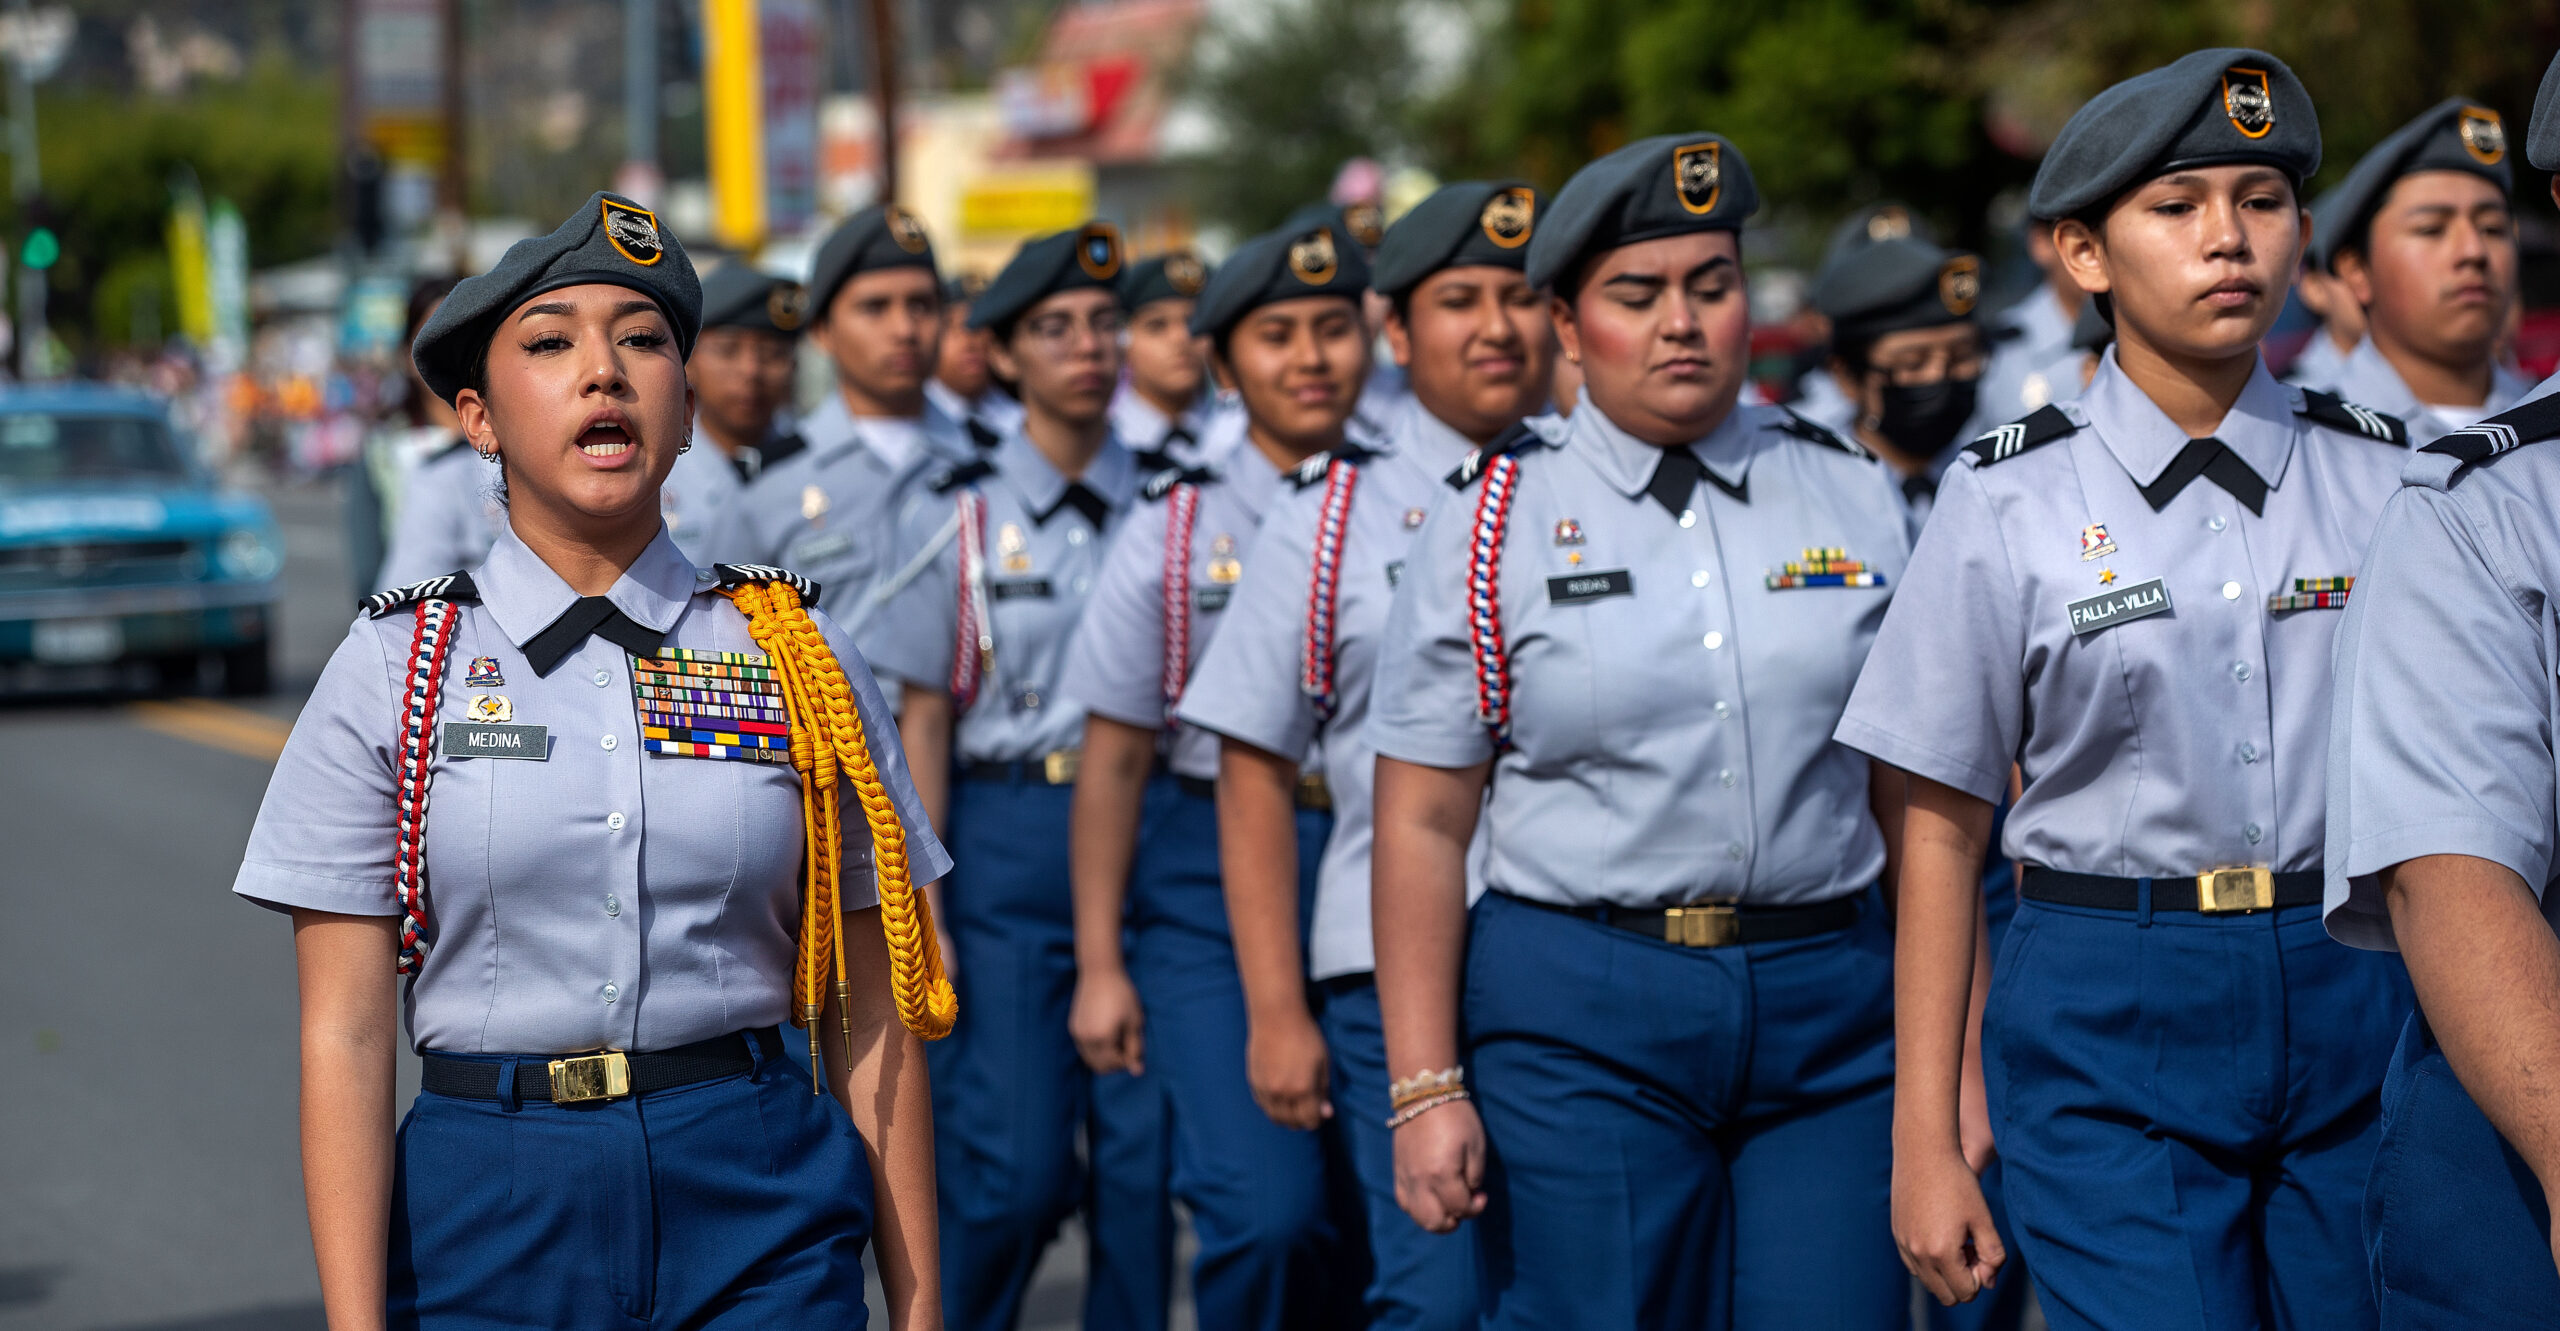 Why Junior ROTC Programs in US High Schools Are Needed Now More Than Ever